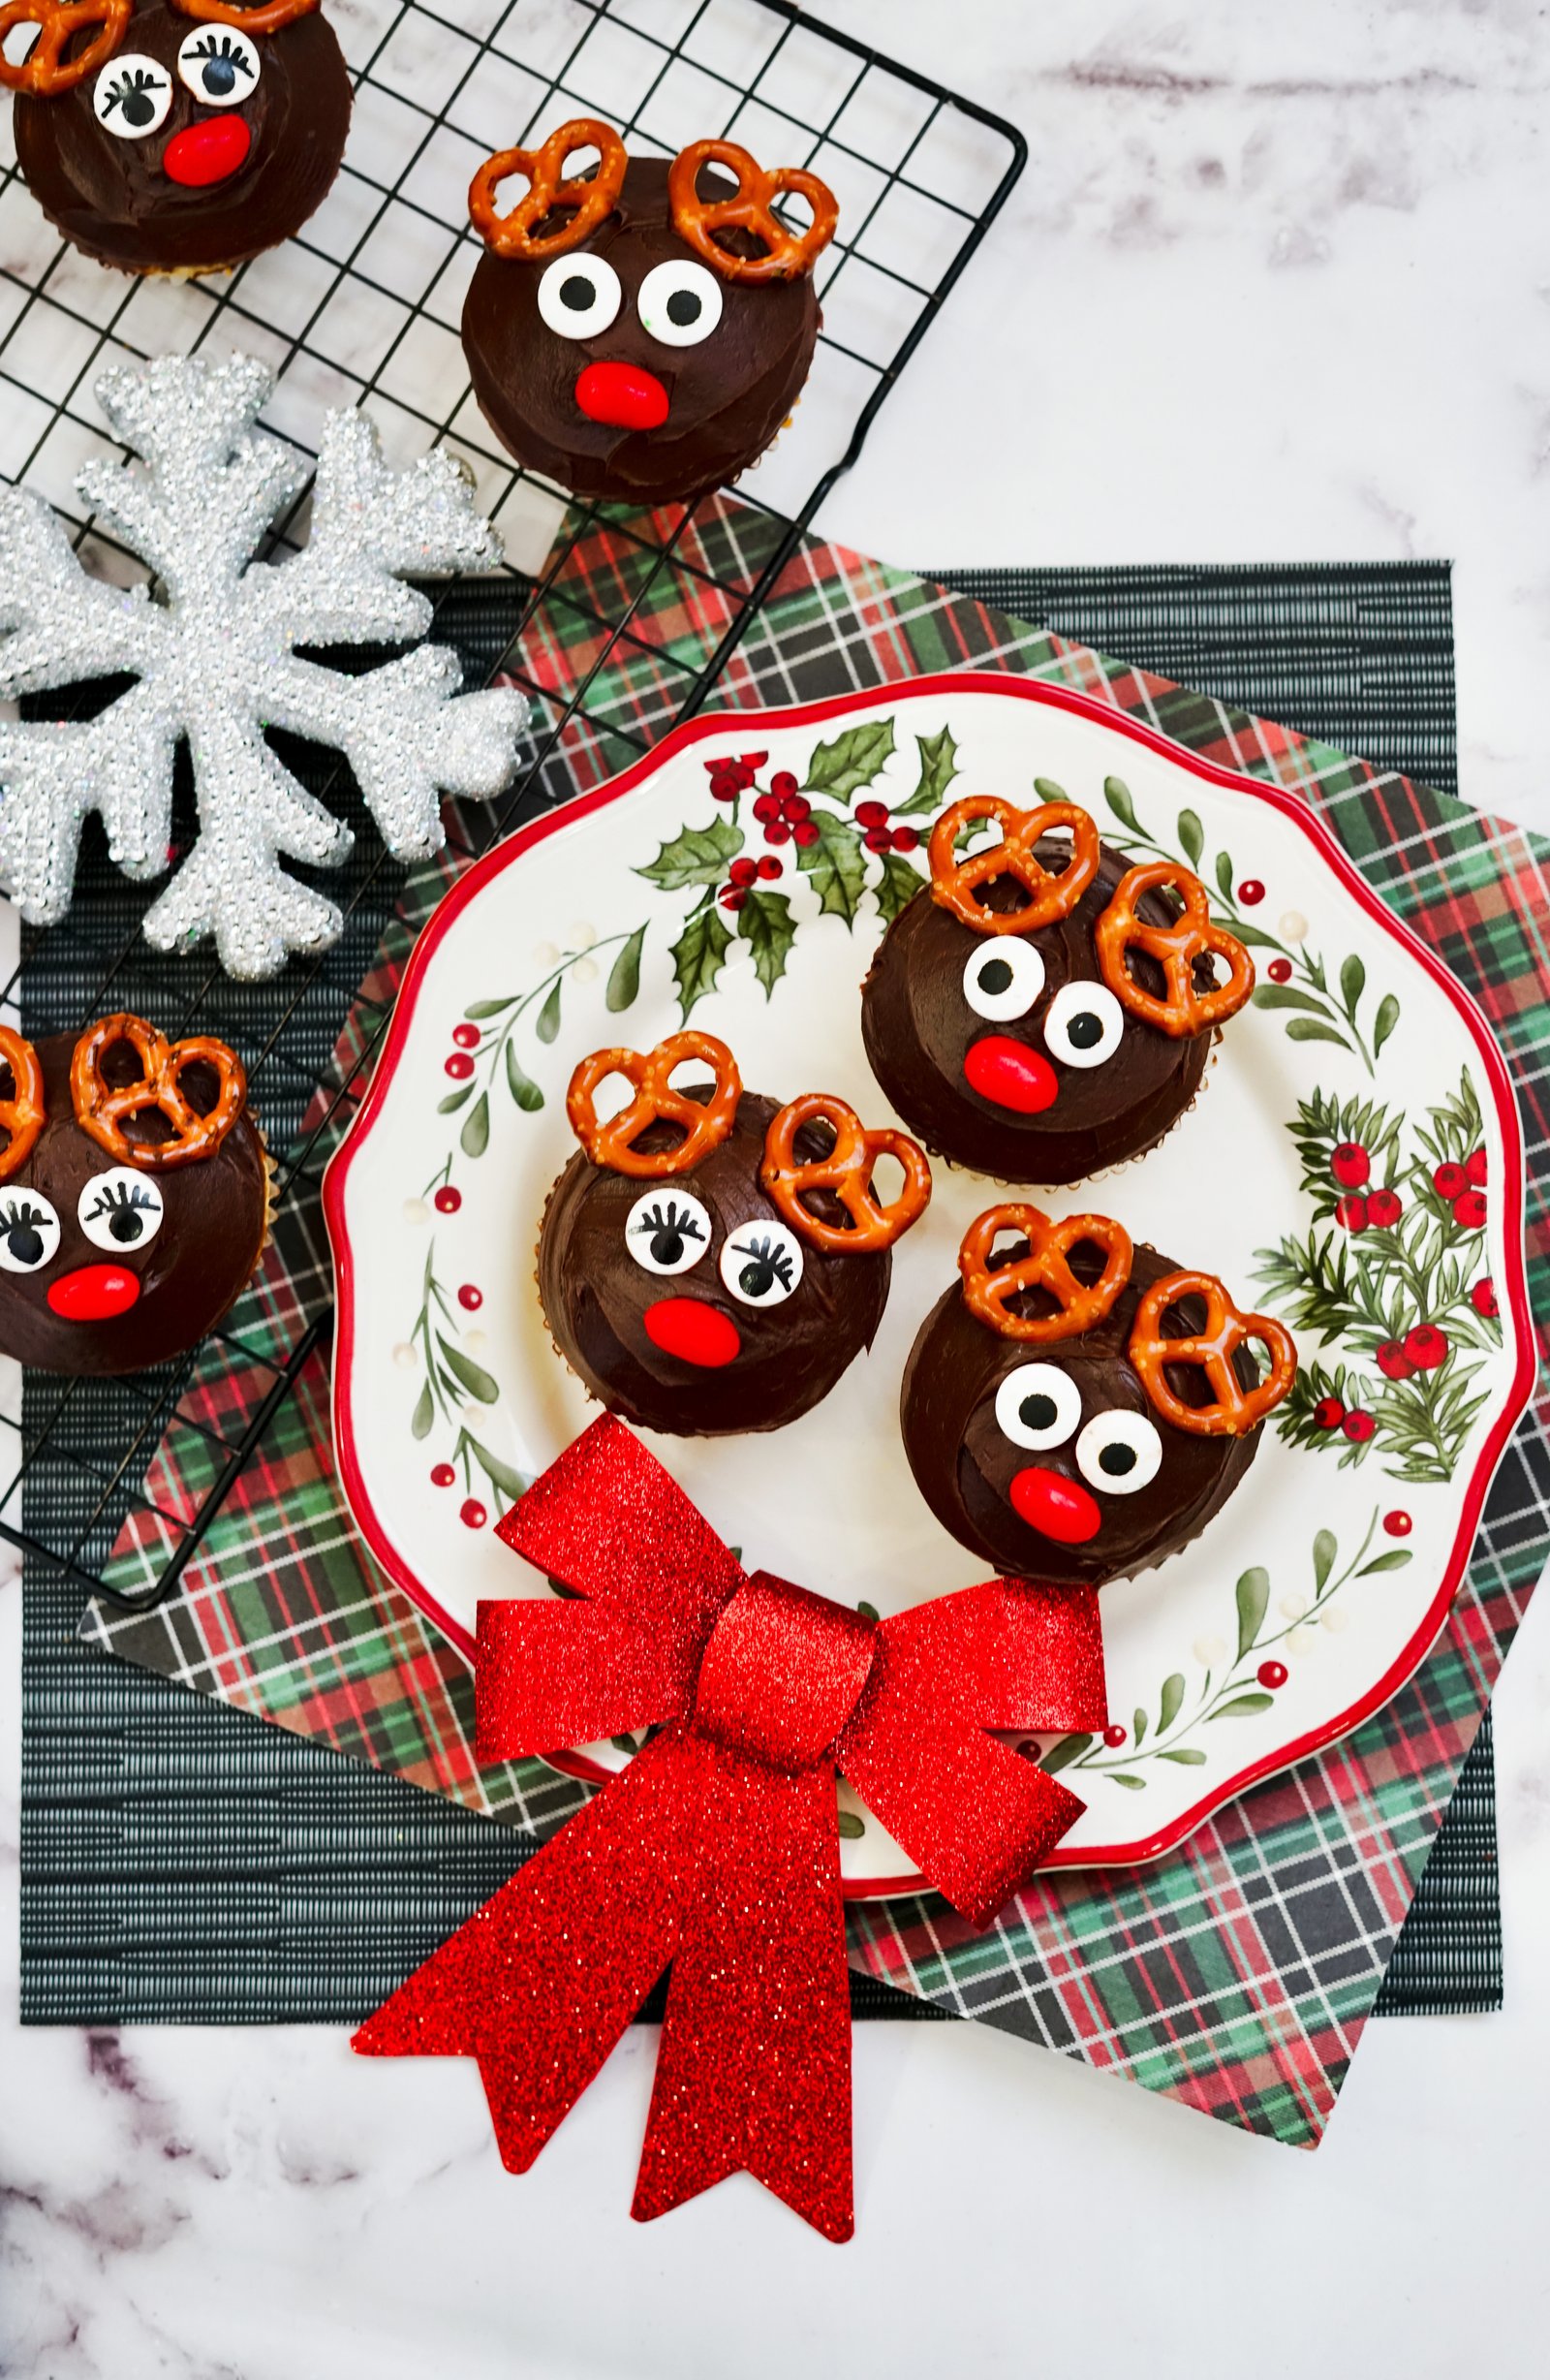 Horizontal rudolph cupcakes on a plate and cooling rack with chocolate icing